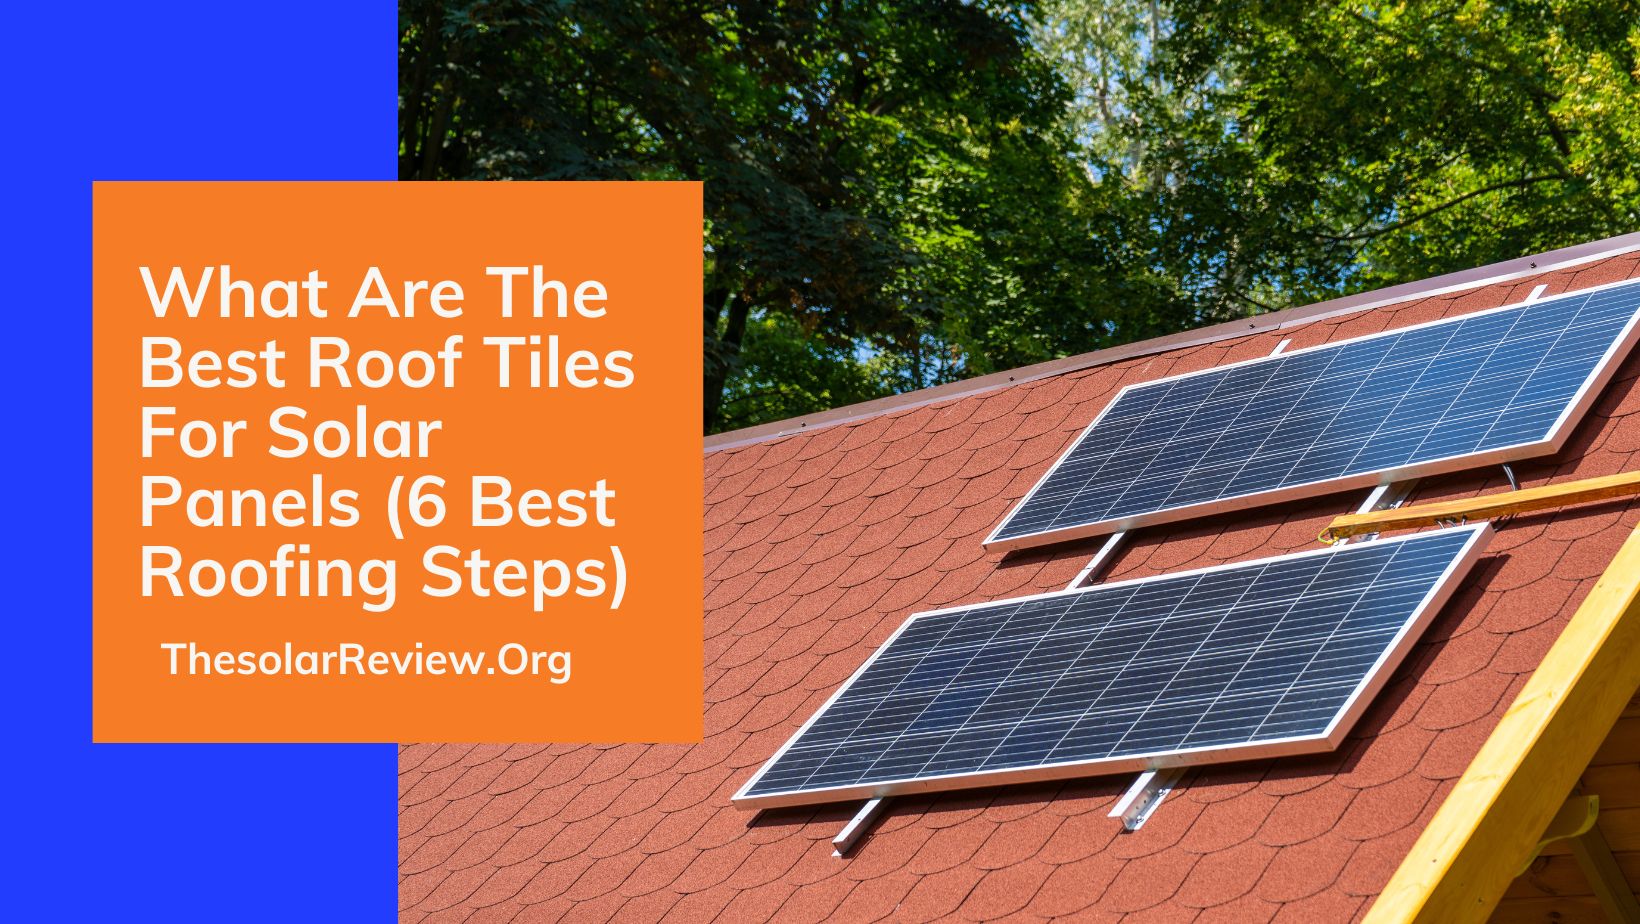 What Are The Best Roof Tiles For Solar Panels (6 Best Roofing Steps)